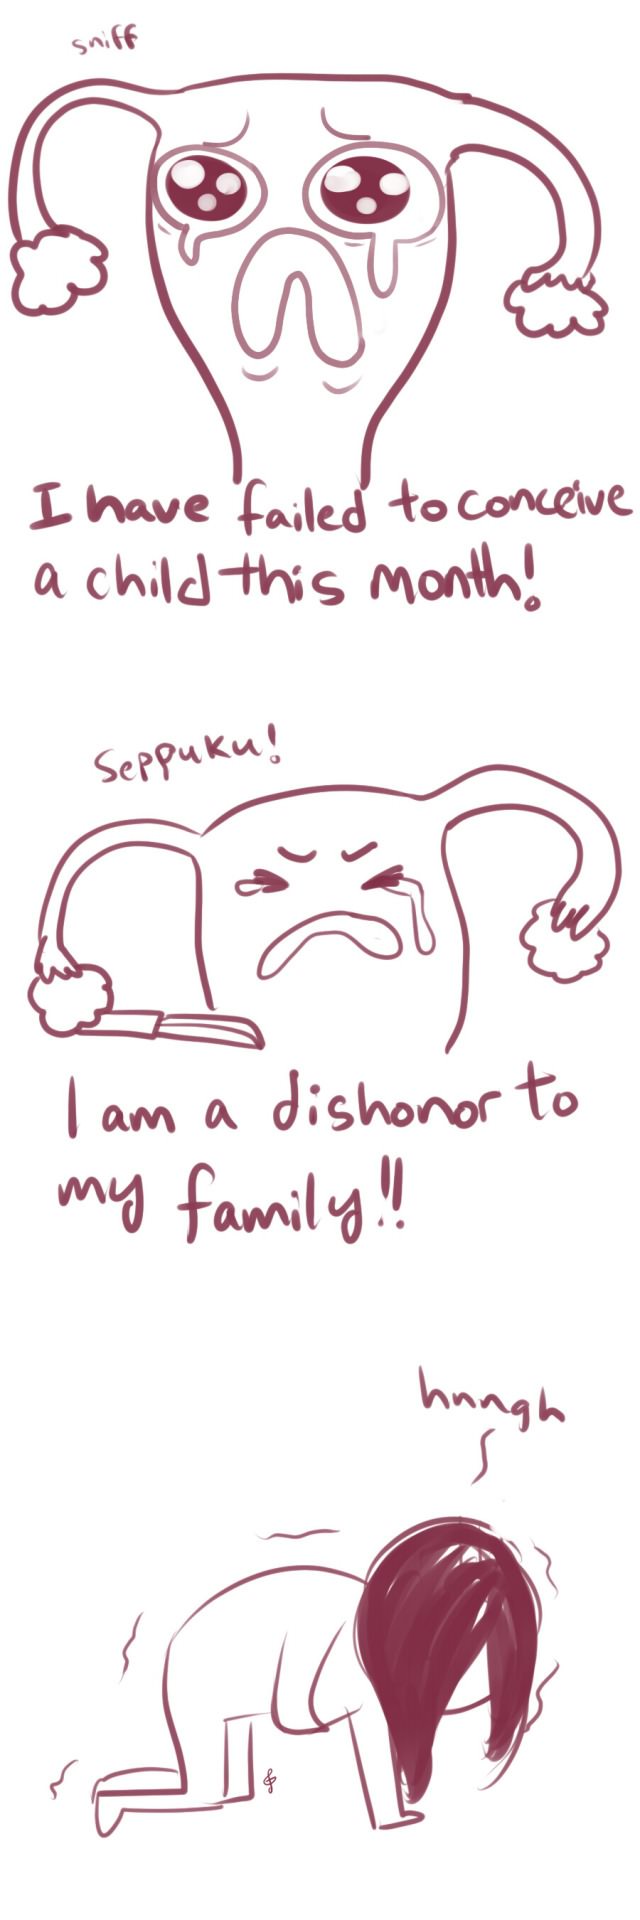 i have failed to conceive a child this month, i am a dishonour to my family, seppuku, hnngh, uterus problems